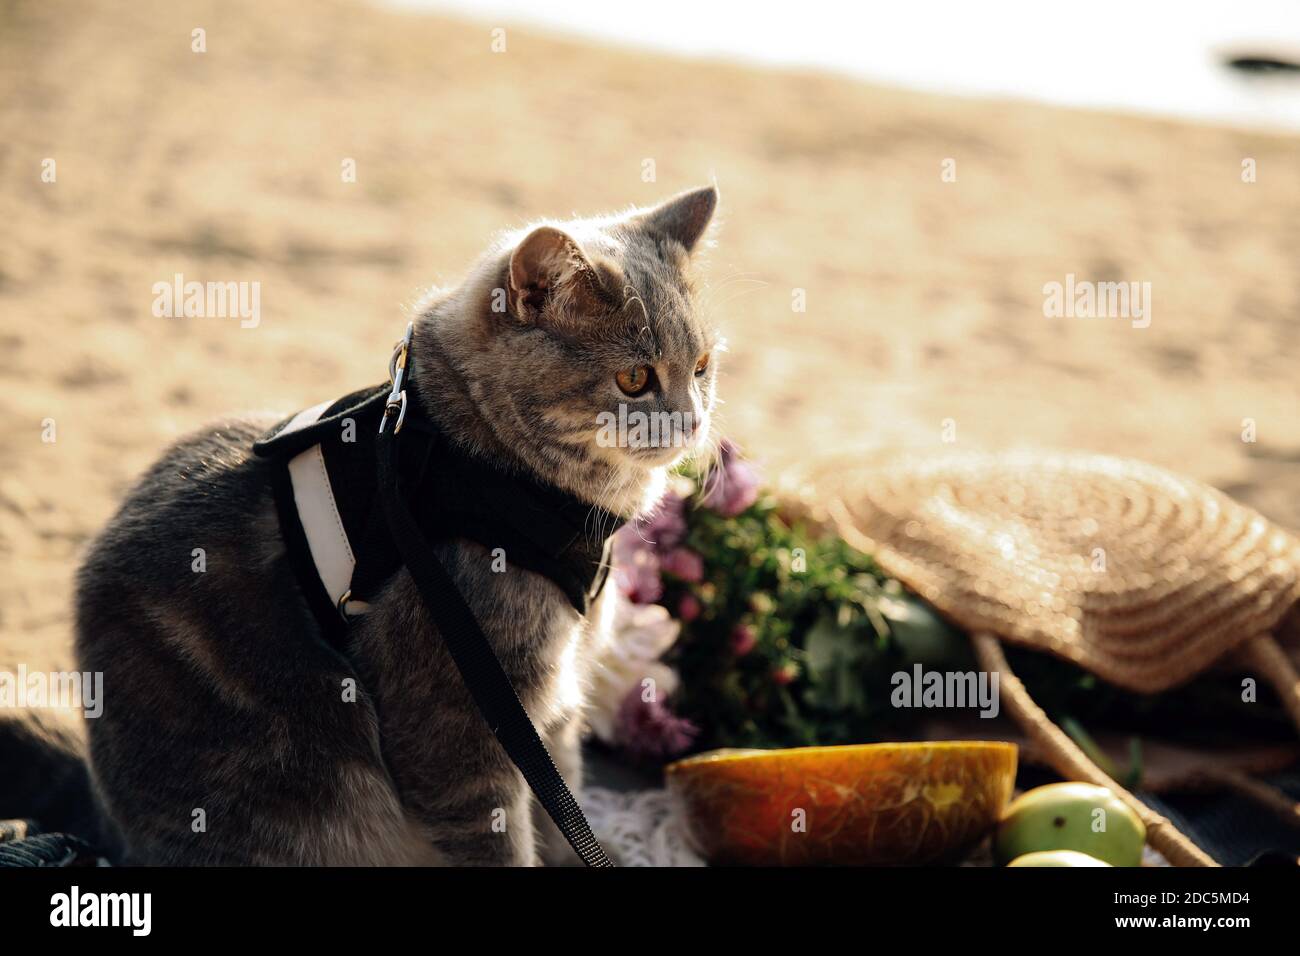 This stock photo shows a Scottish Straight gray cat with a leash on the beach on a sunny day Stock Photo